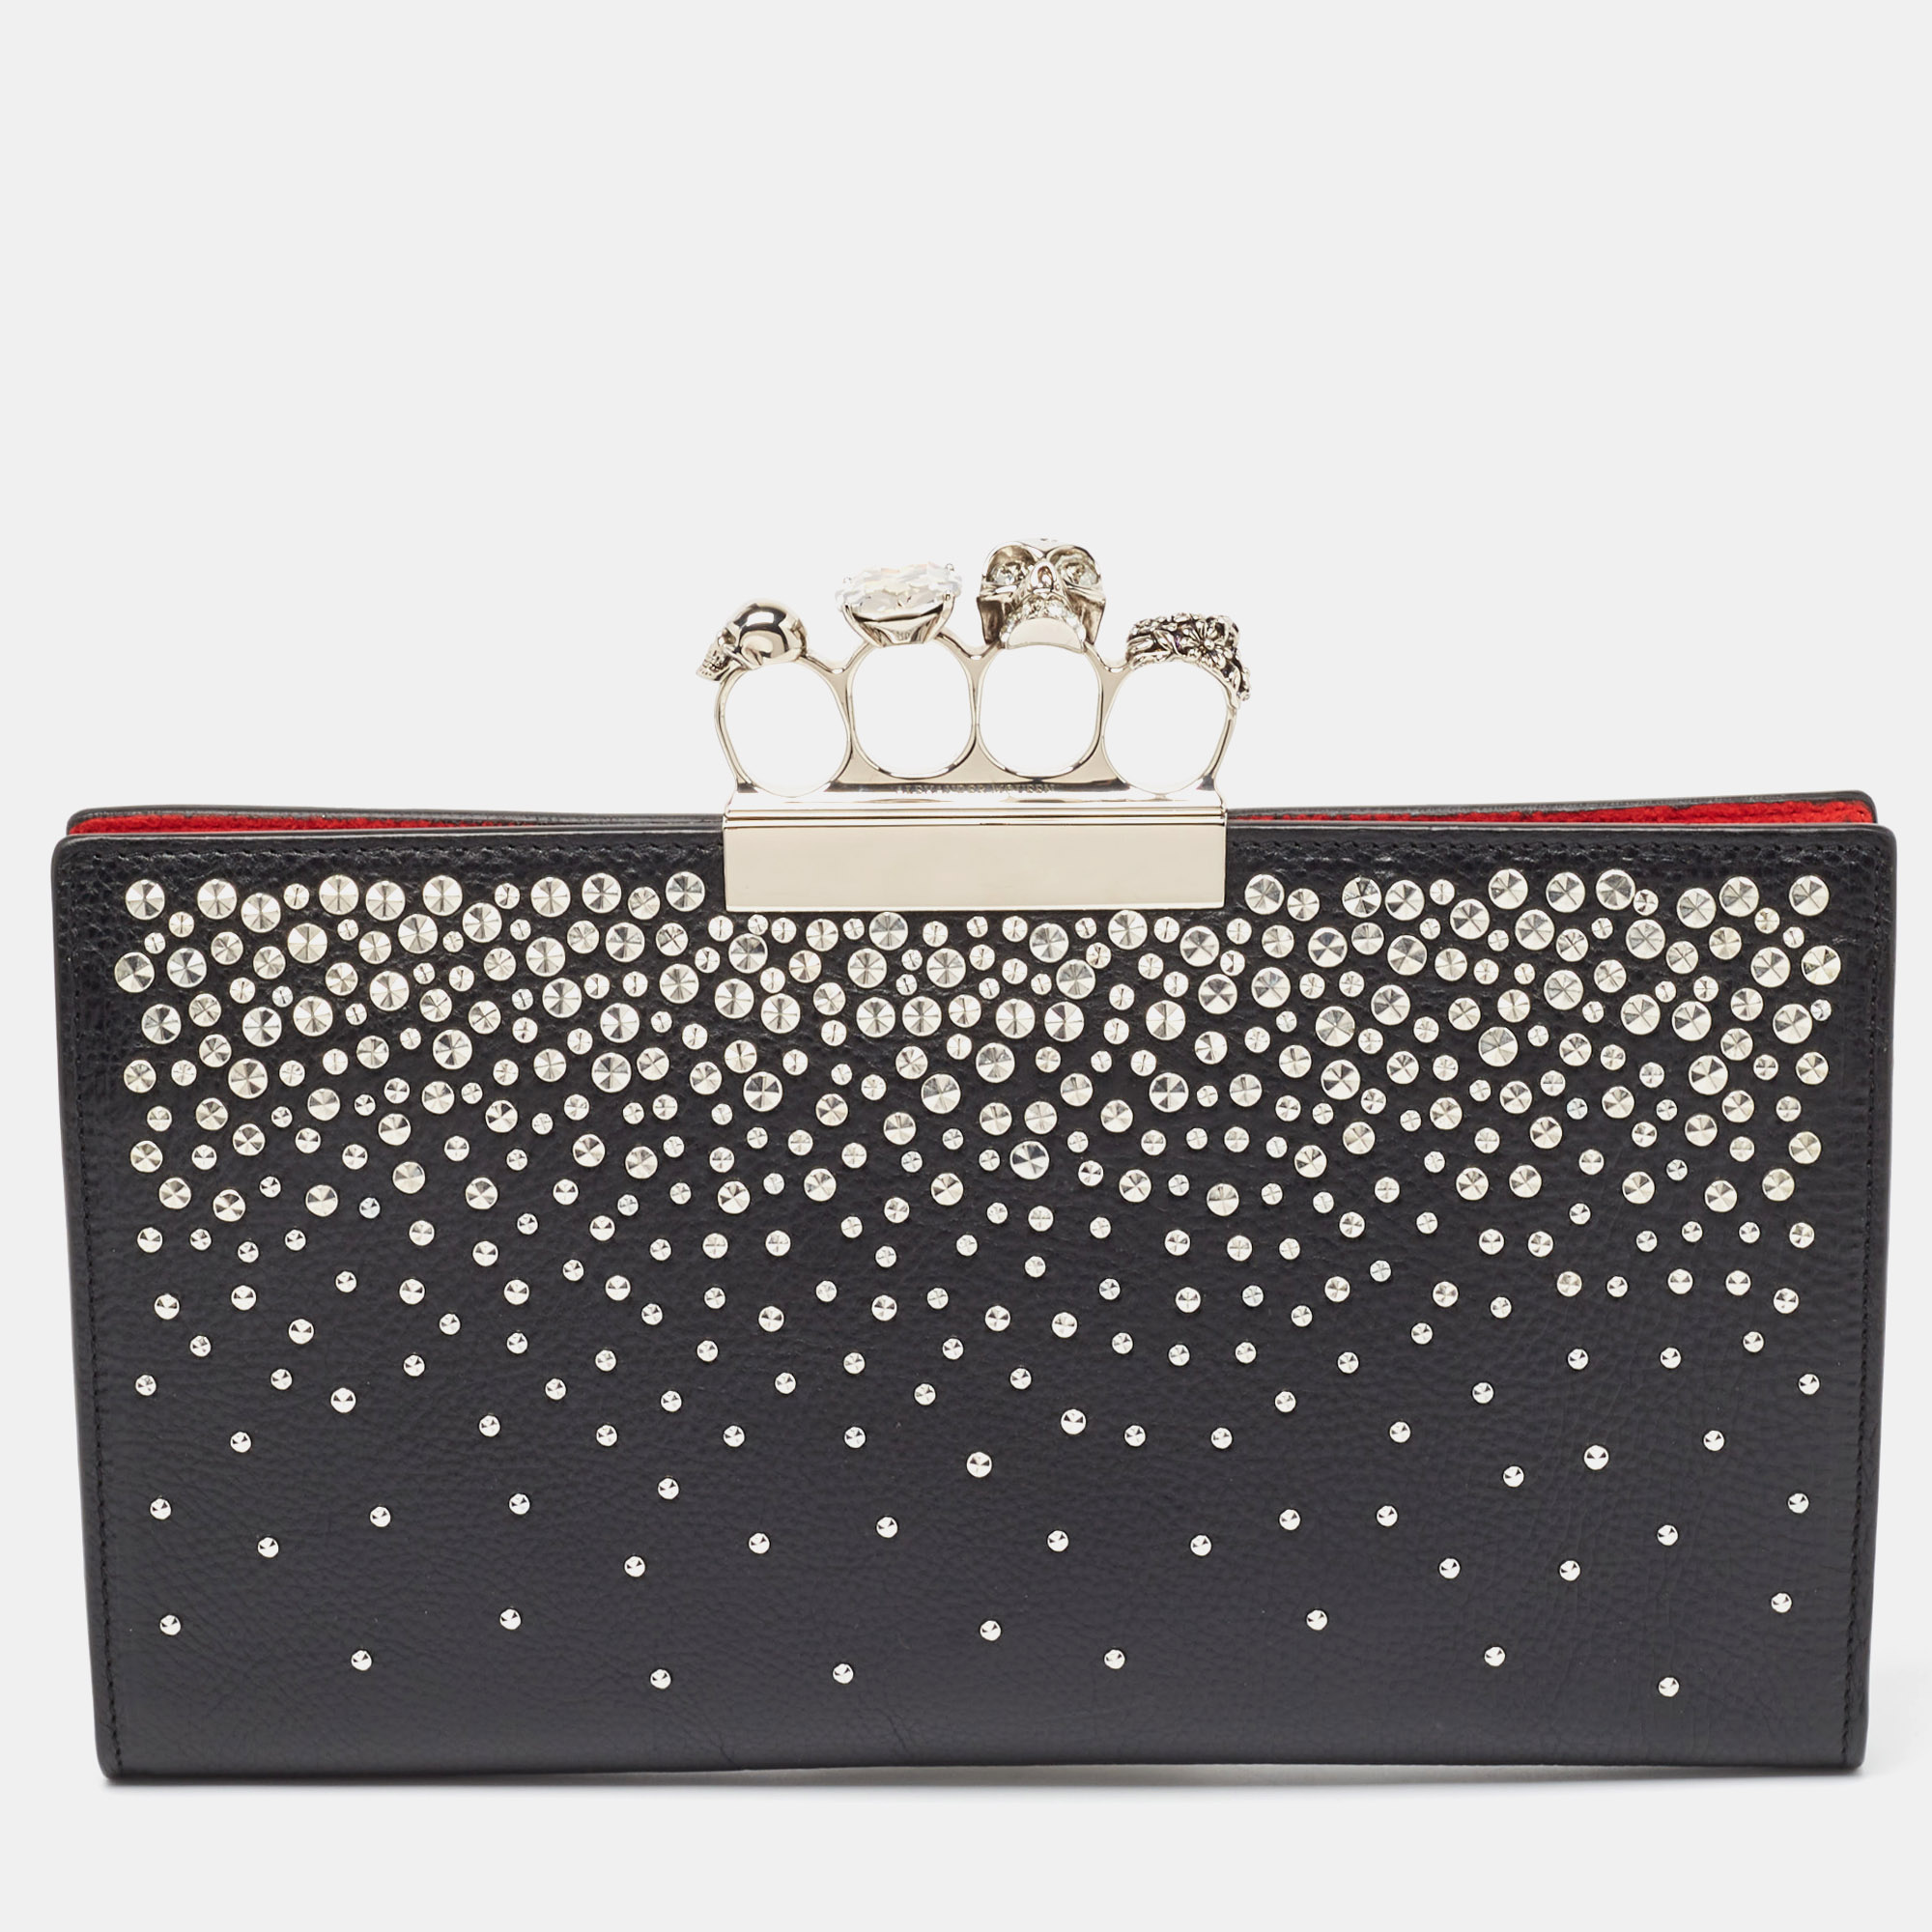 Pre-owned Alexander Mcqueen Black Leather Studded Knuckle Flap Clutch